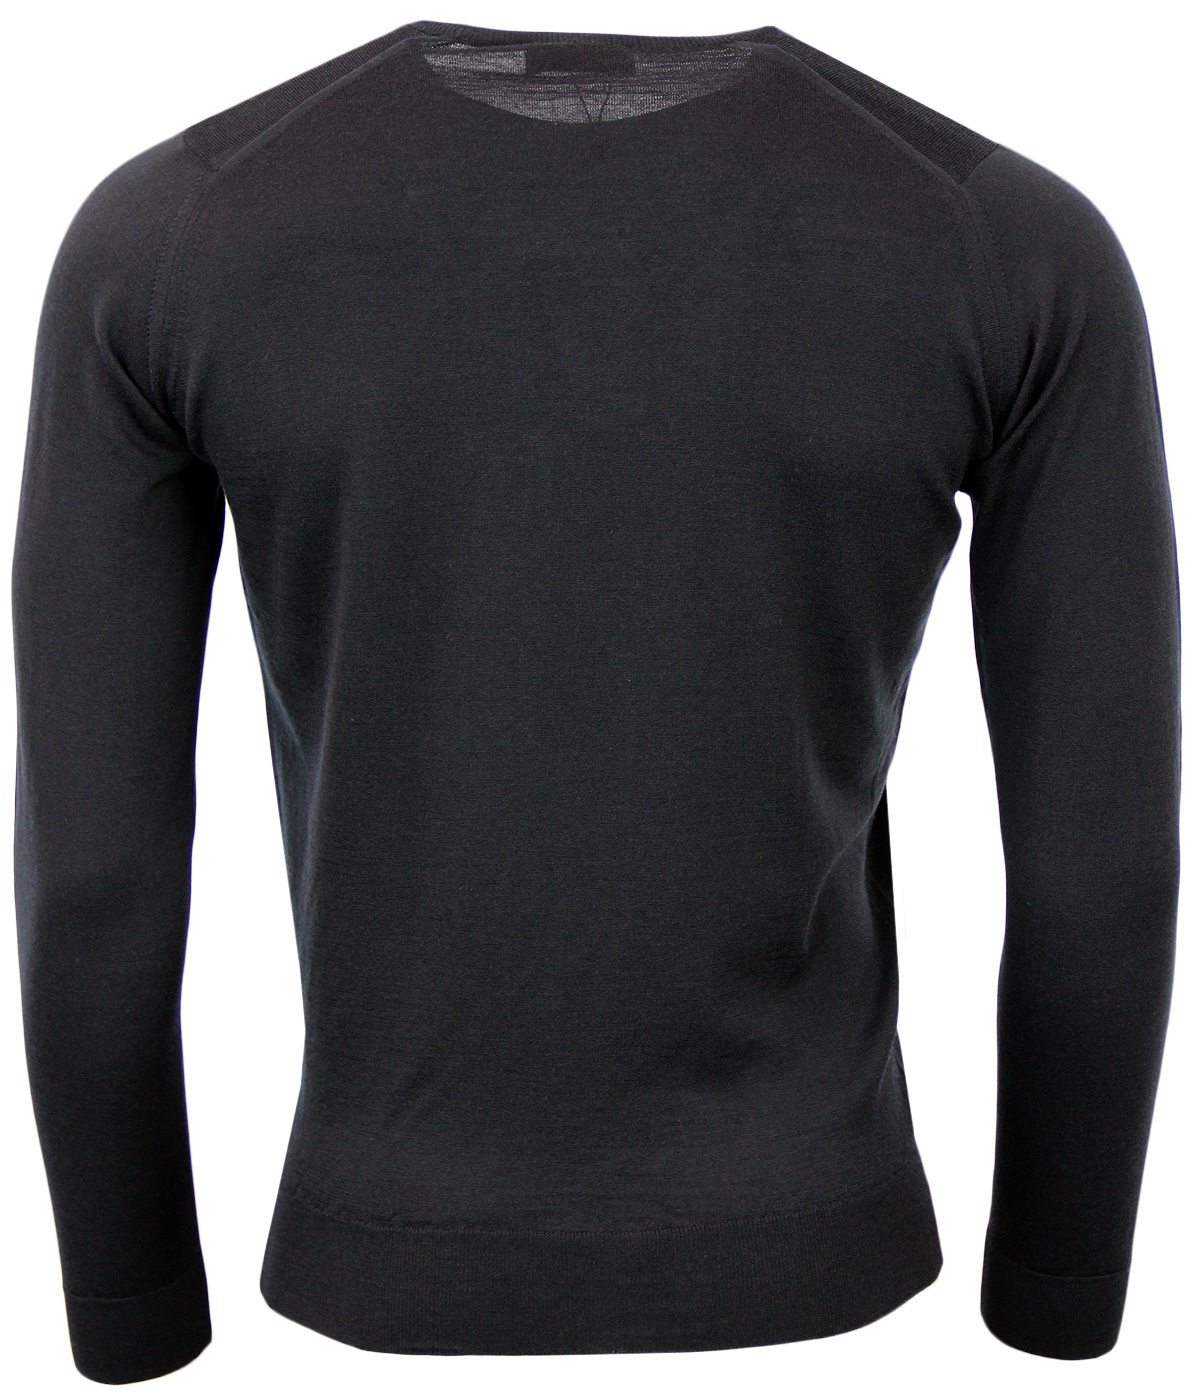 JOHN SMEDLEY Cleves Retro 60s Mod Knit Crew Neck Jumper in Black